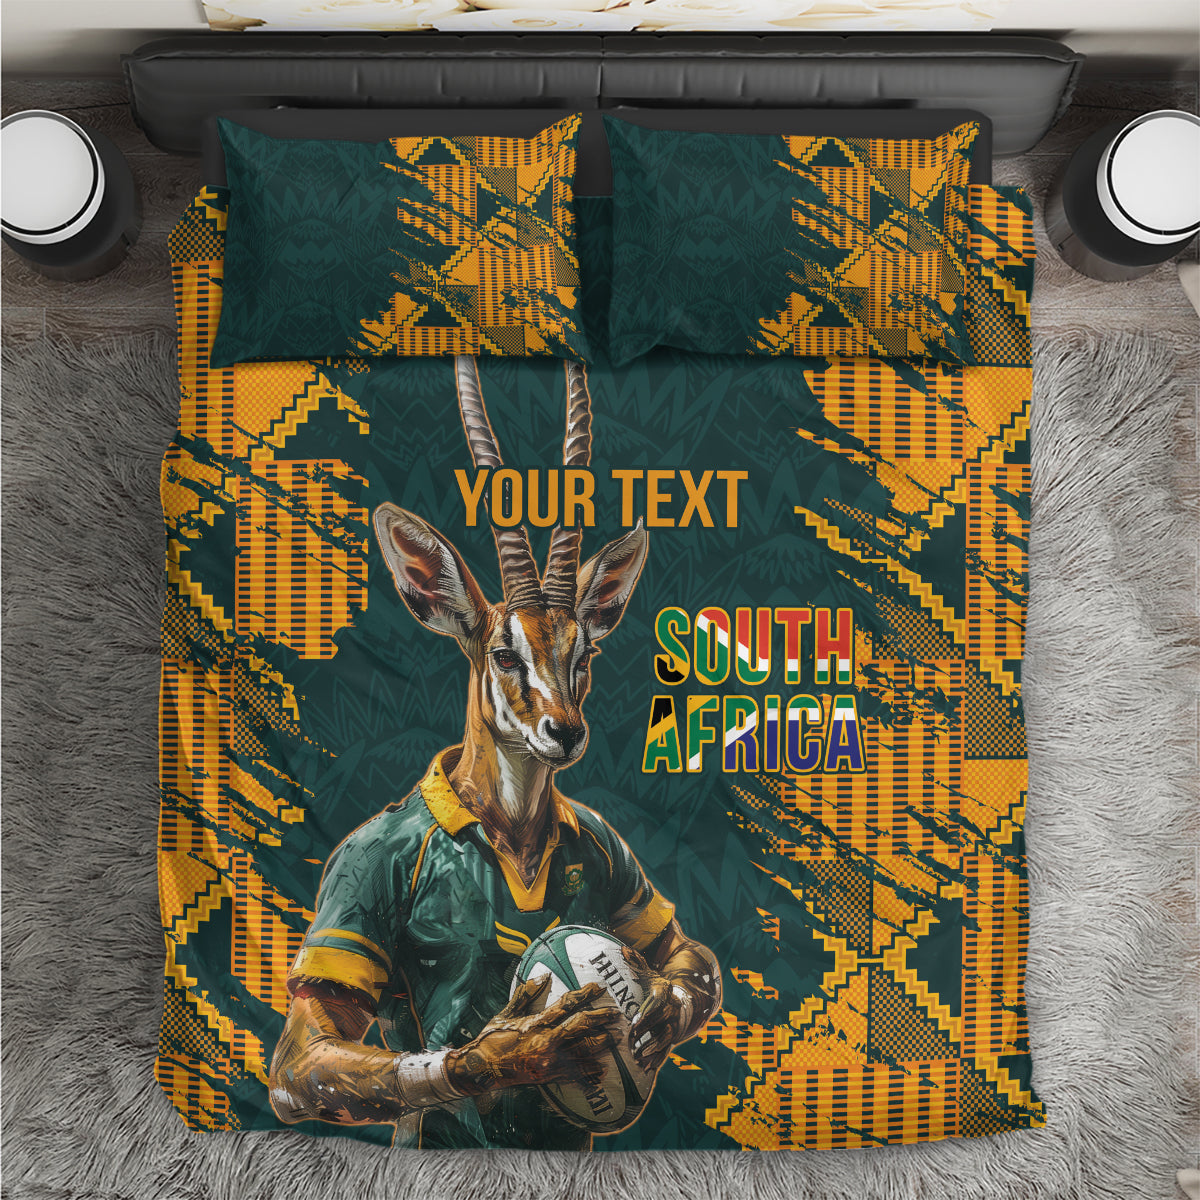 Custom South Africa Rugby Bedding Set The Springboks Mascot Sporty Version